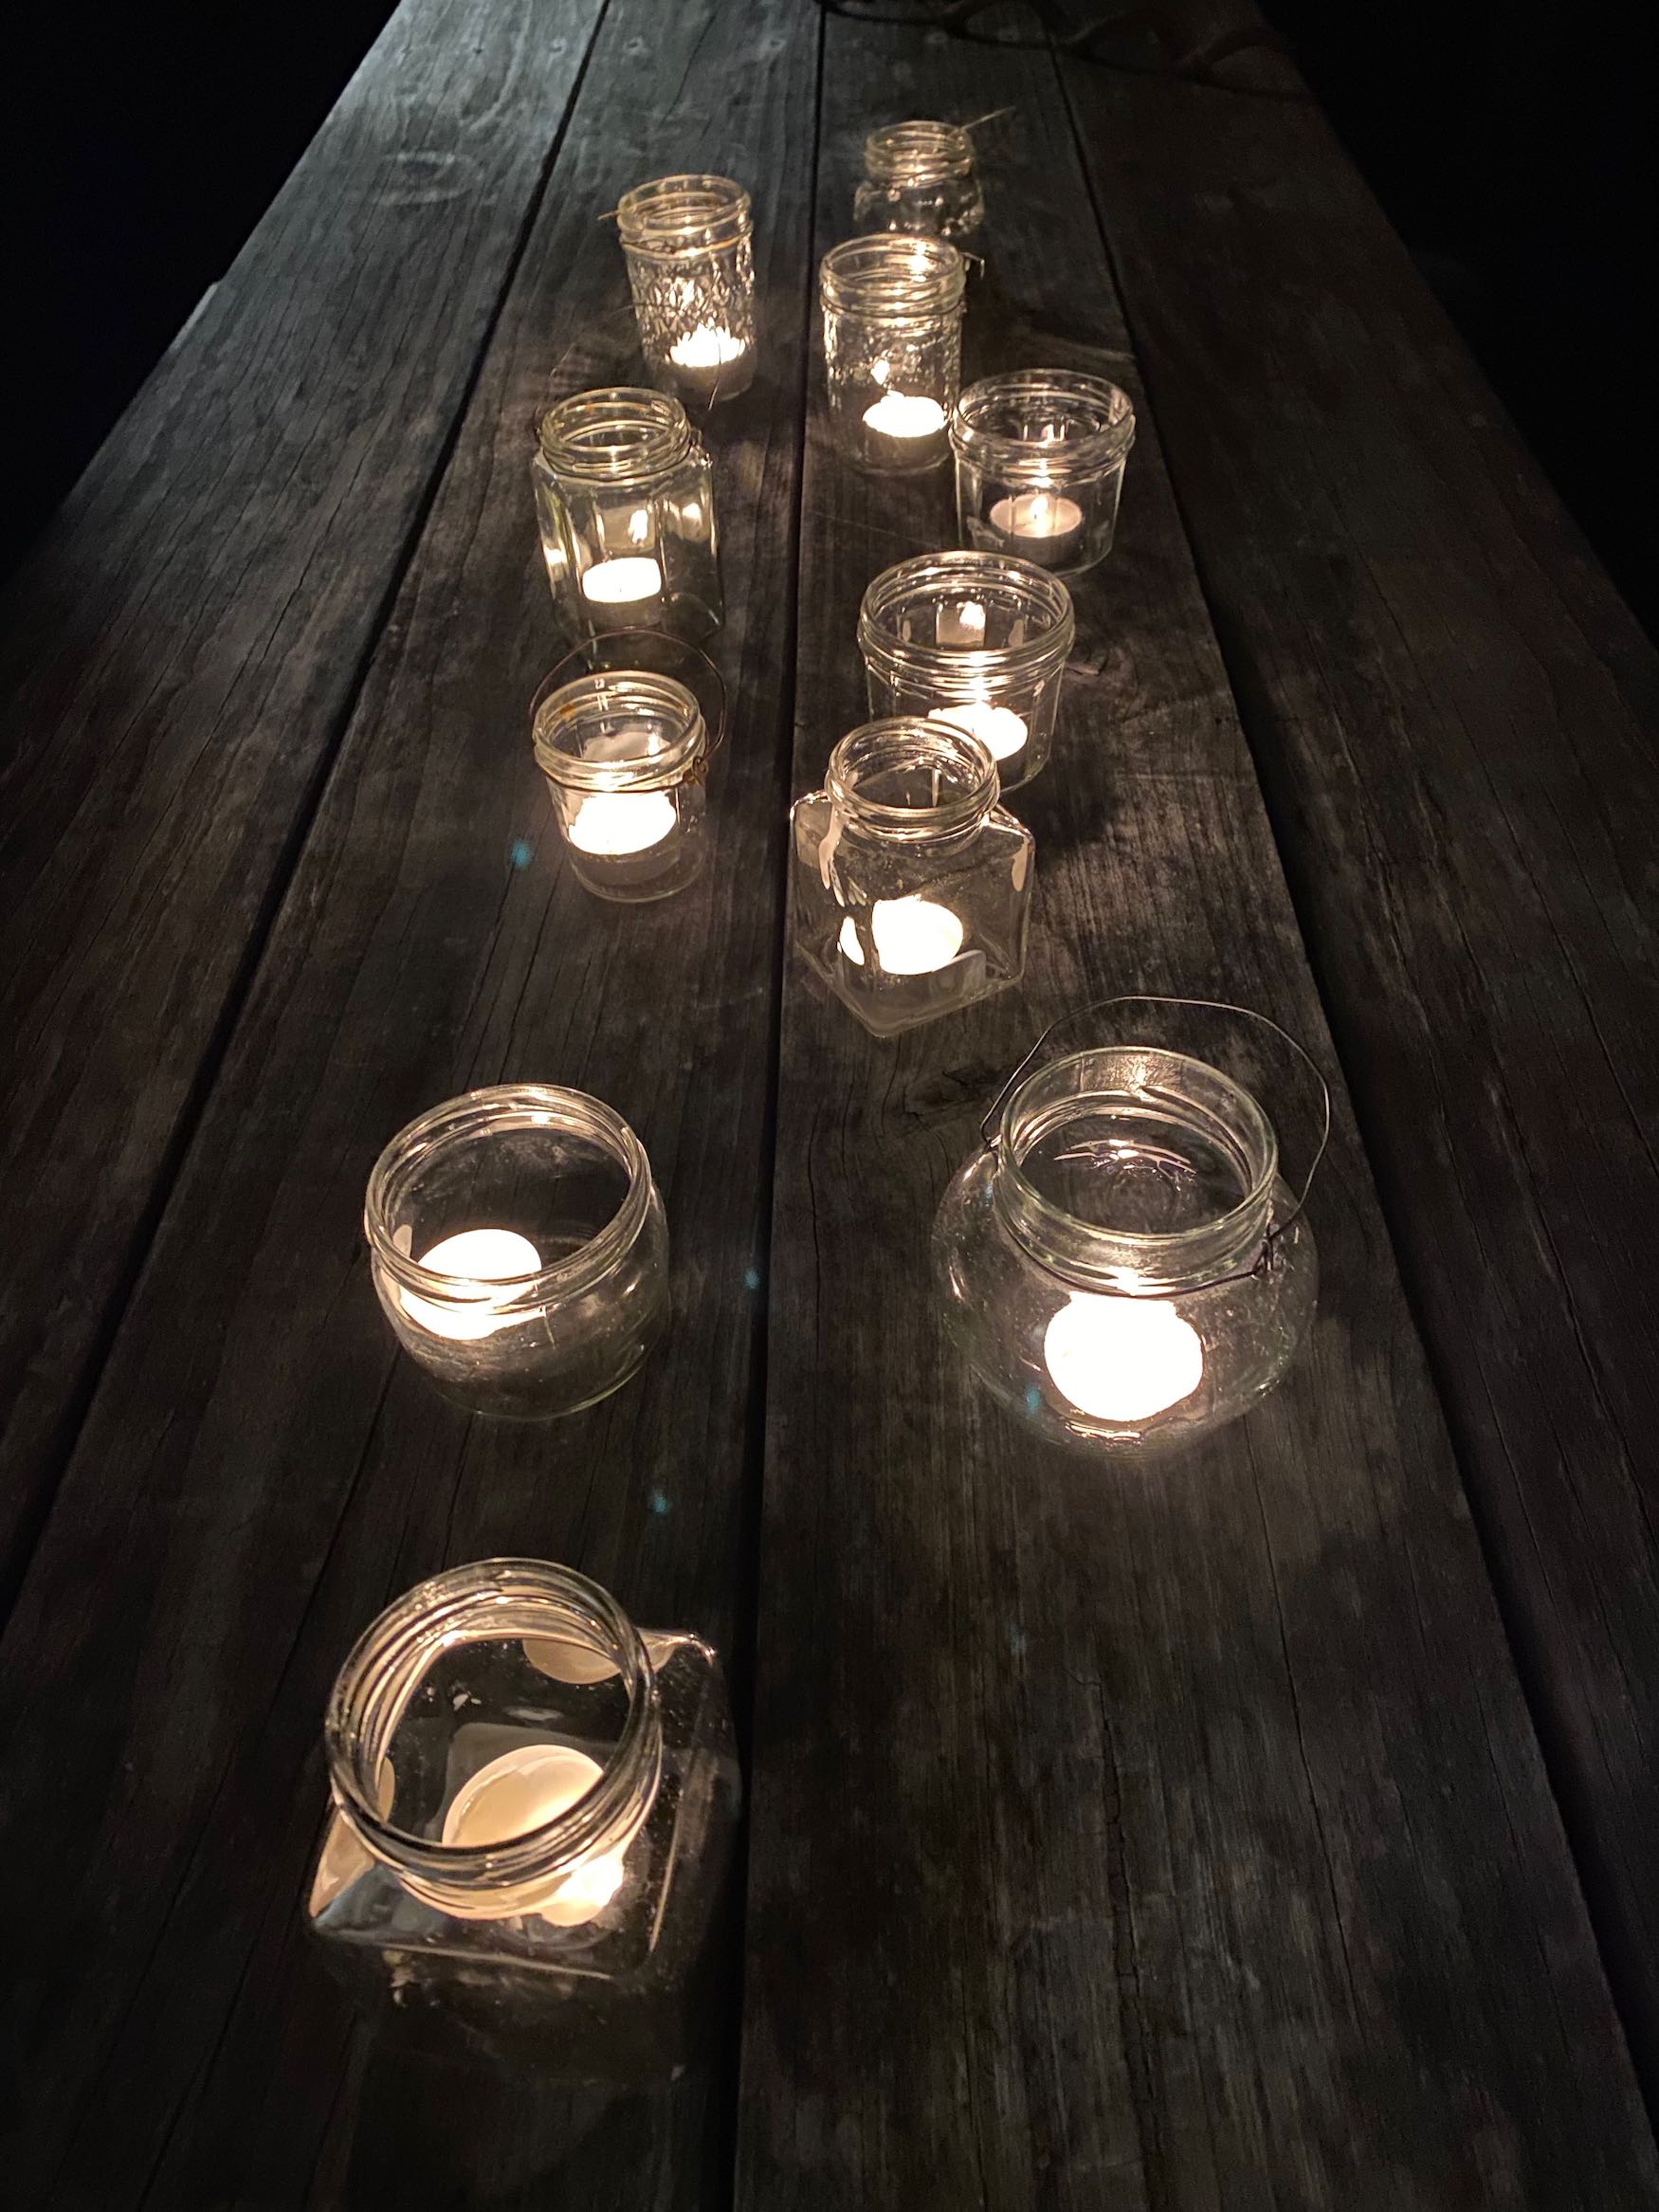 It's the weekend! Number 221, Candles on Our Picnic Table